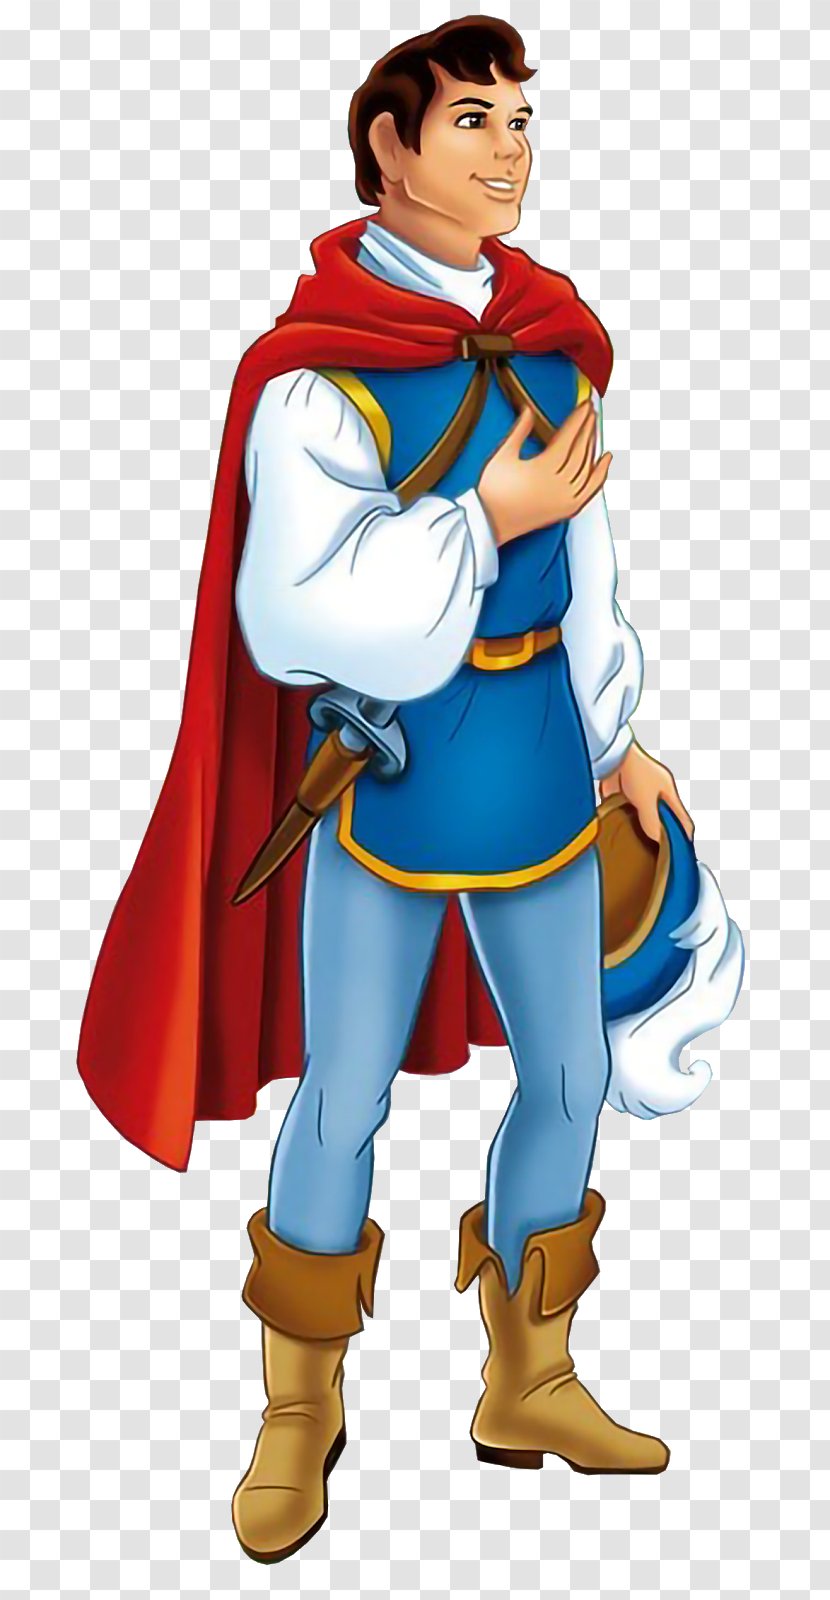 Snow White And The Seven Dwarfs Prince Charming Pinocchio Superman - Fictional Character Transparent PNG